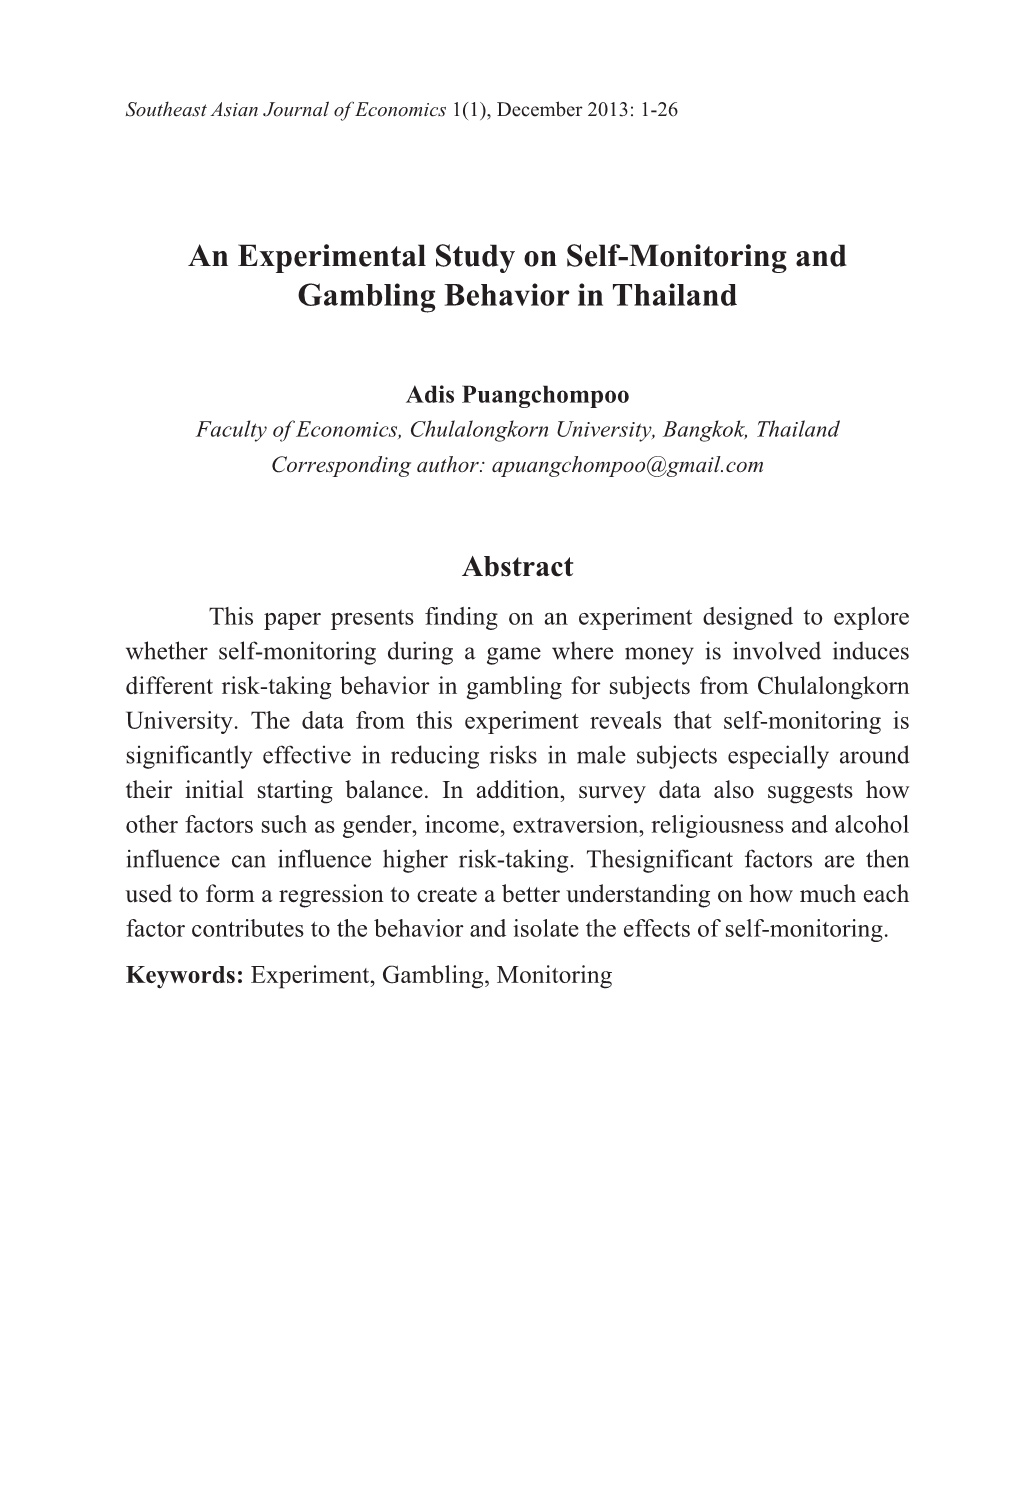 An Experimental Study on Self-Monitoring and Gambling Behavior in Thailand